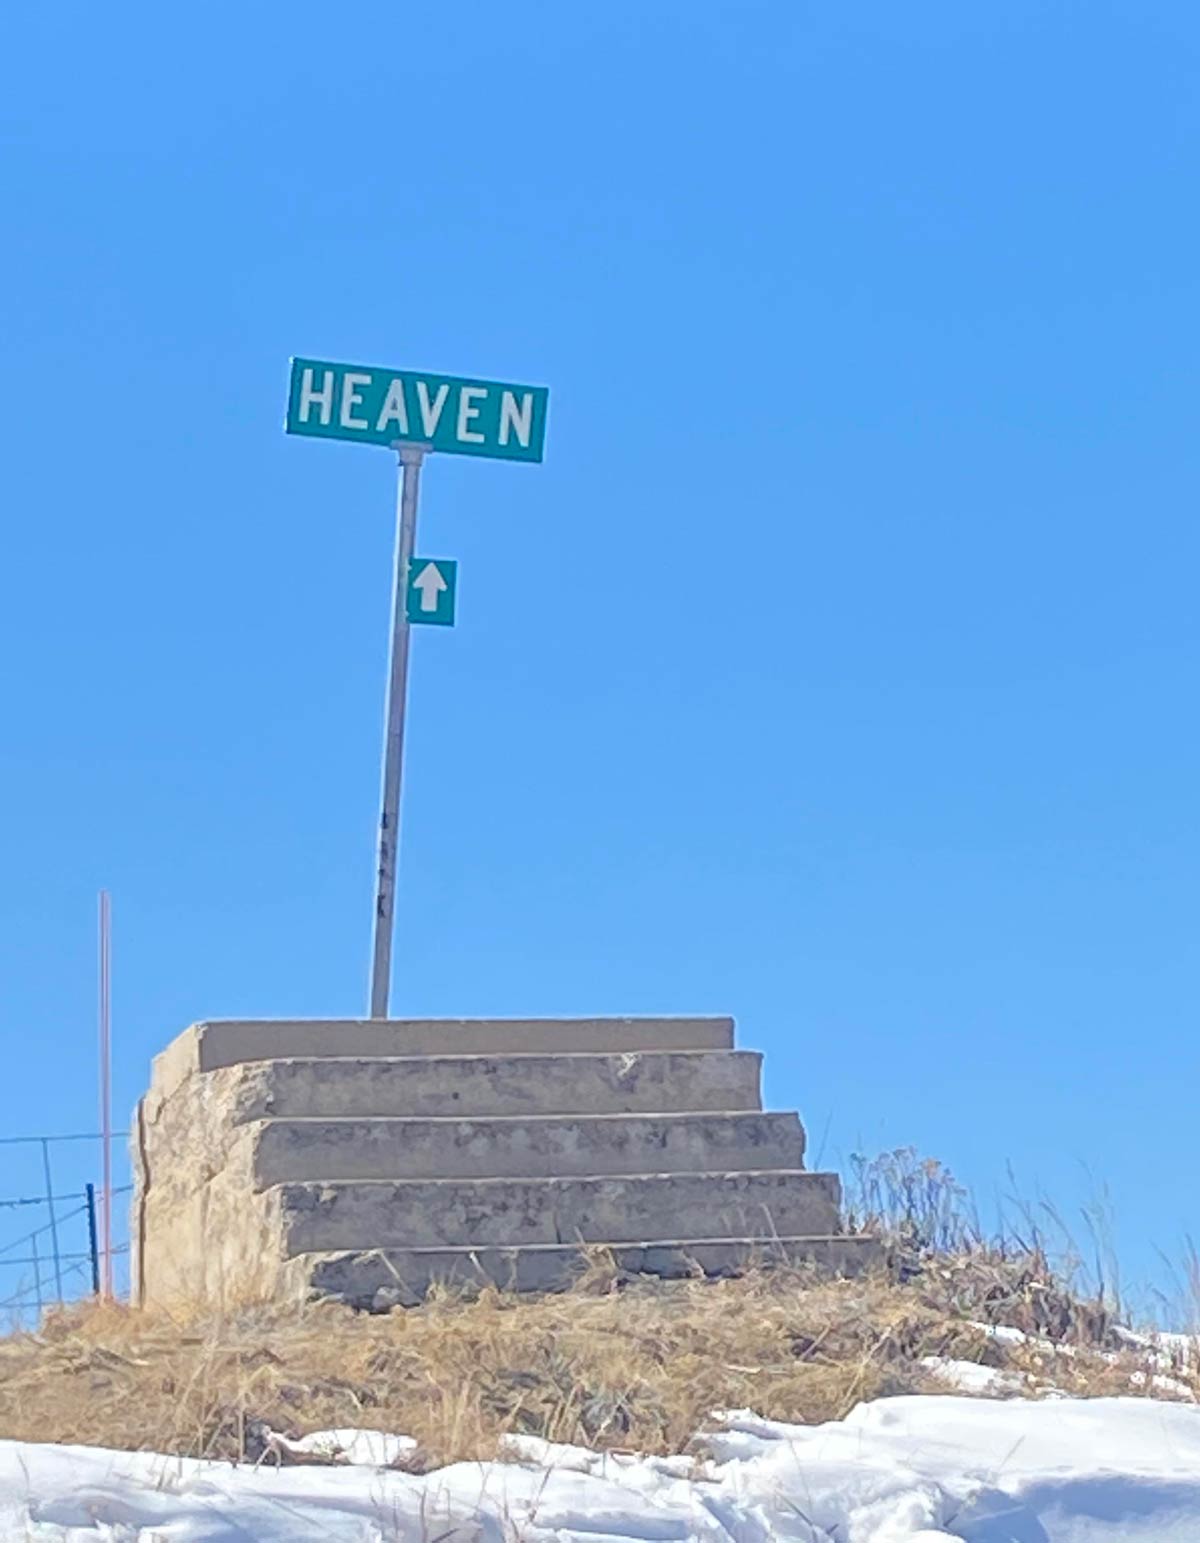 Found the Stairway to Heaven in Colorado Springs